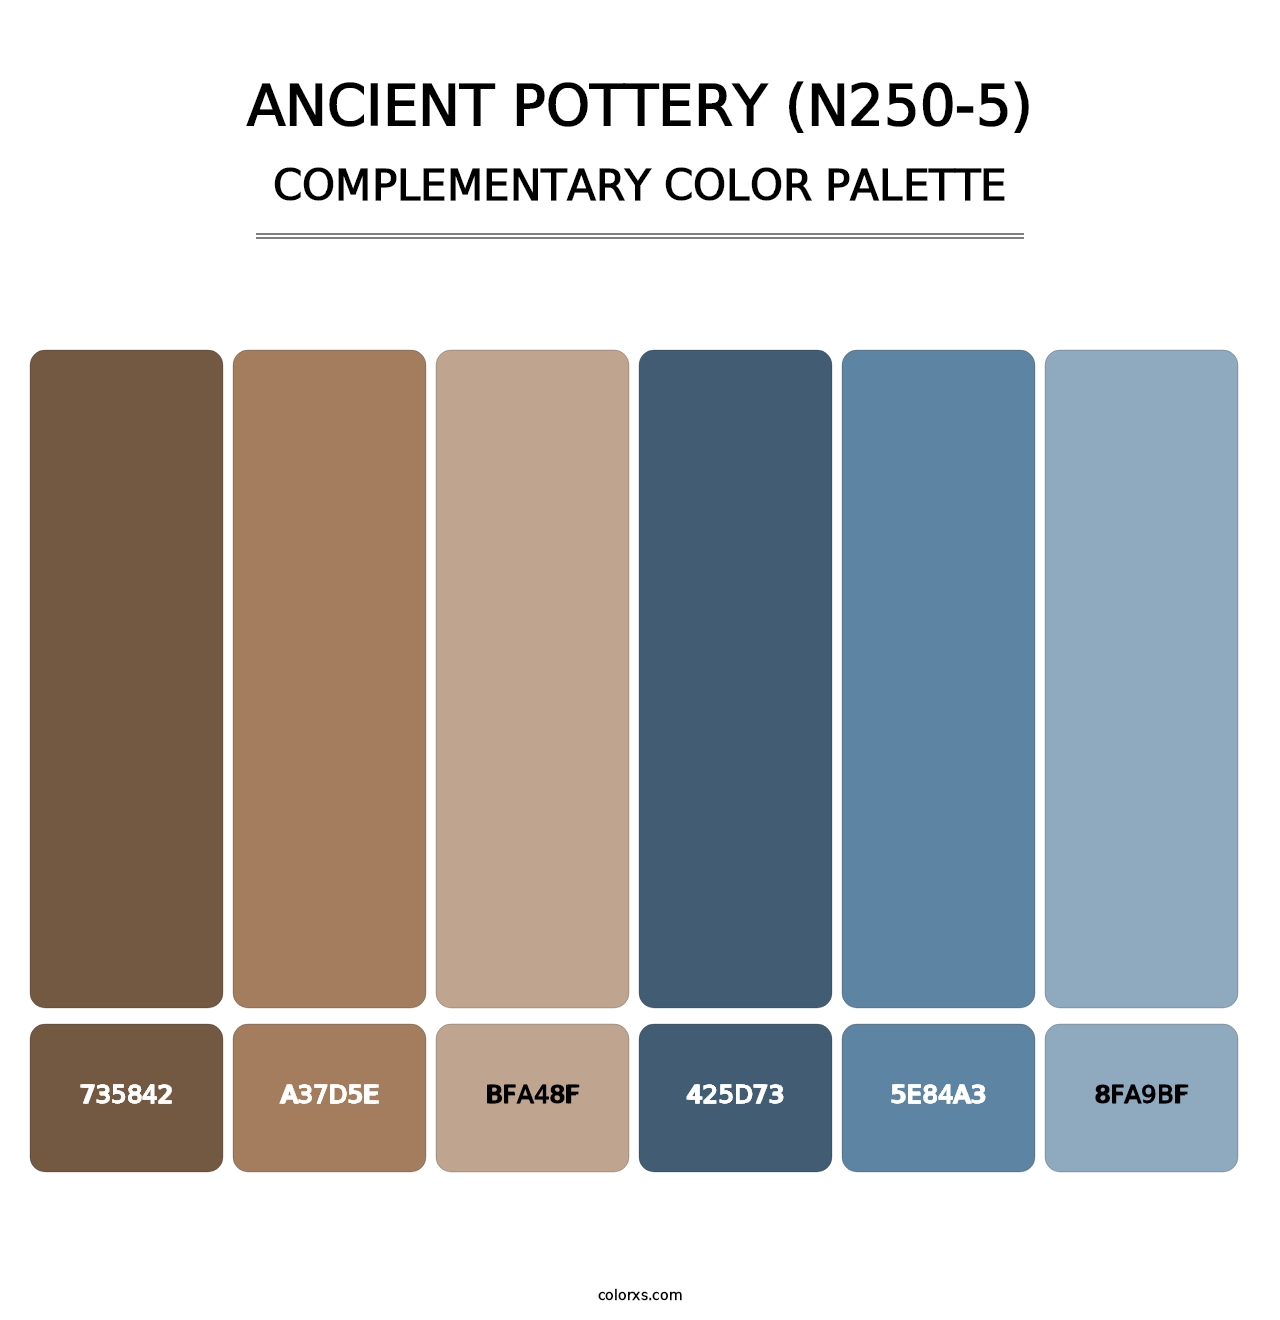 Ancient Pottery (N250-5) - Complementary Color Palette